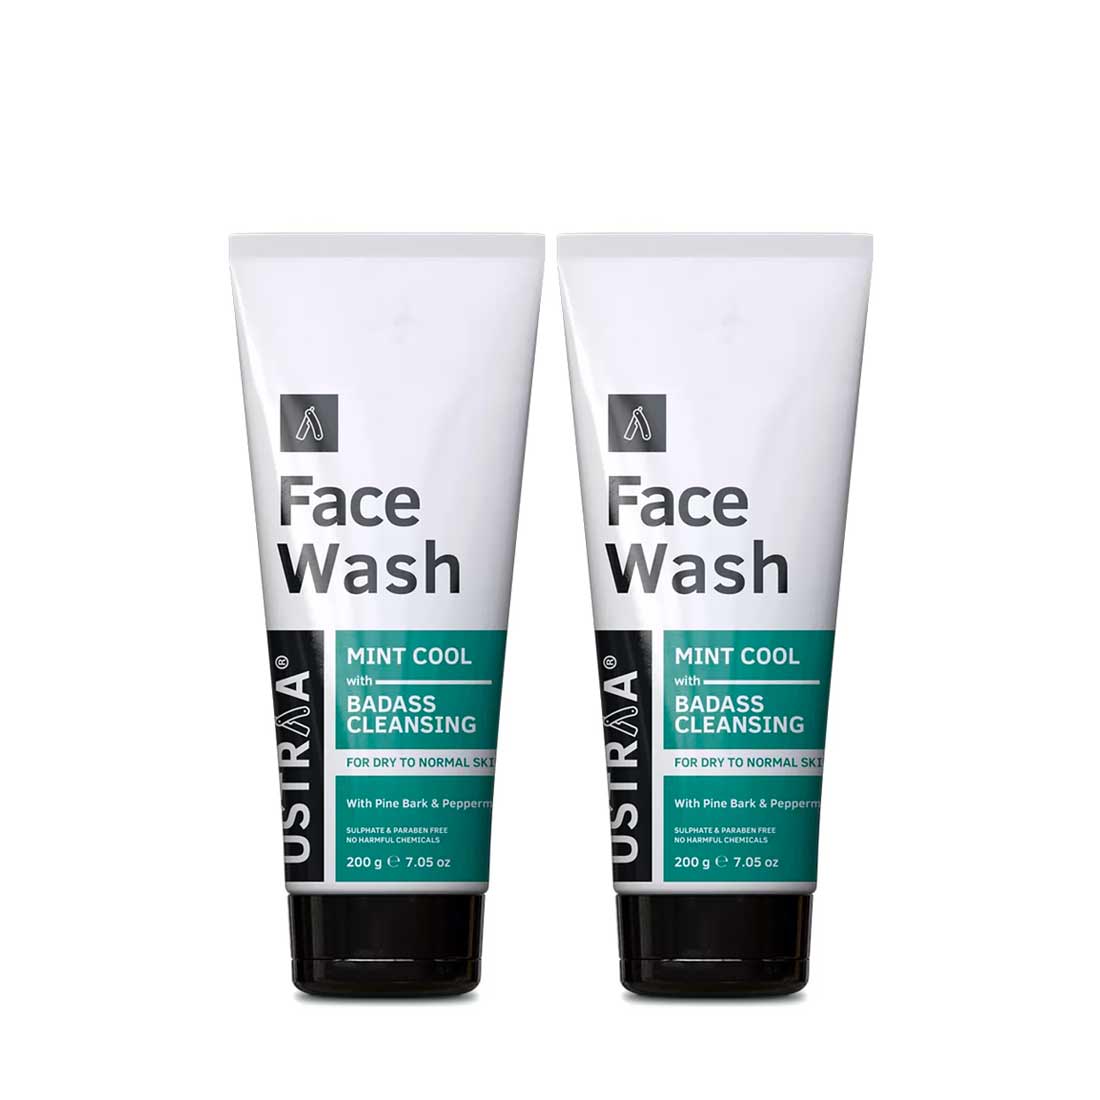 Face Wash - Dry Skin (Mint Cool) - Set of 2